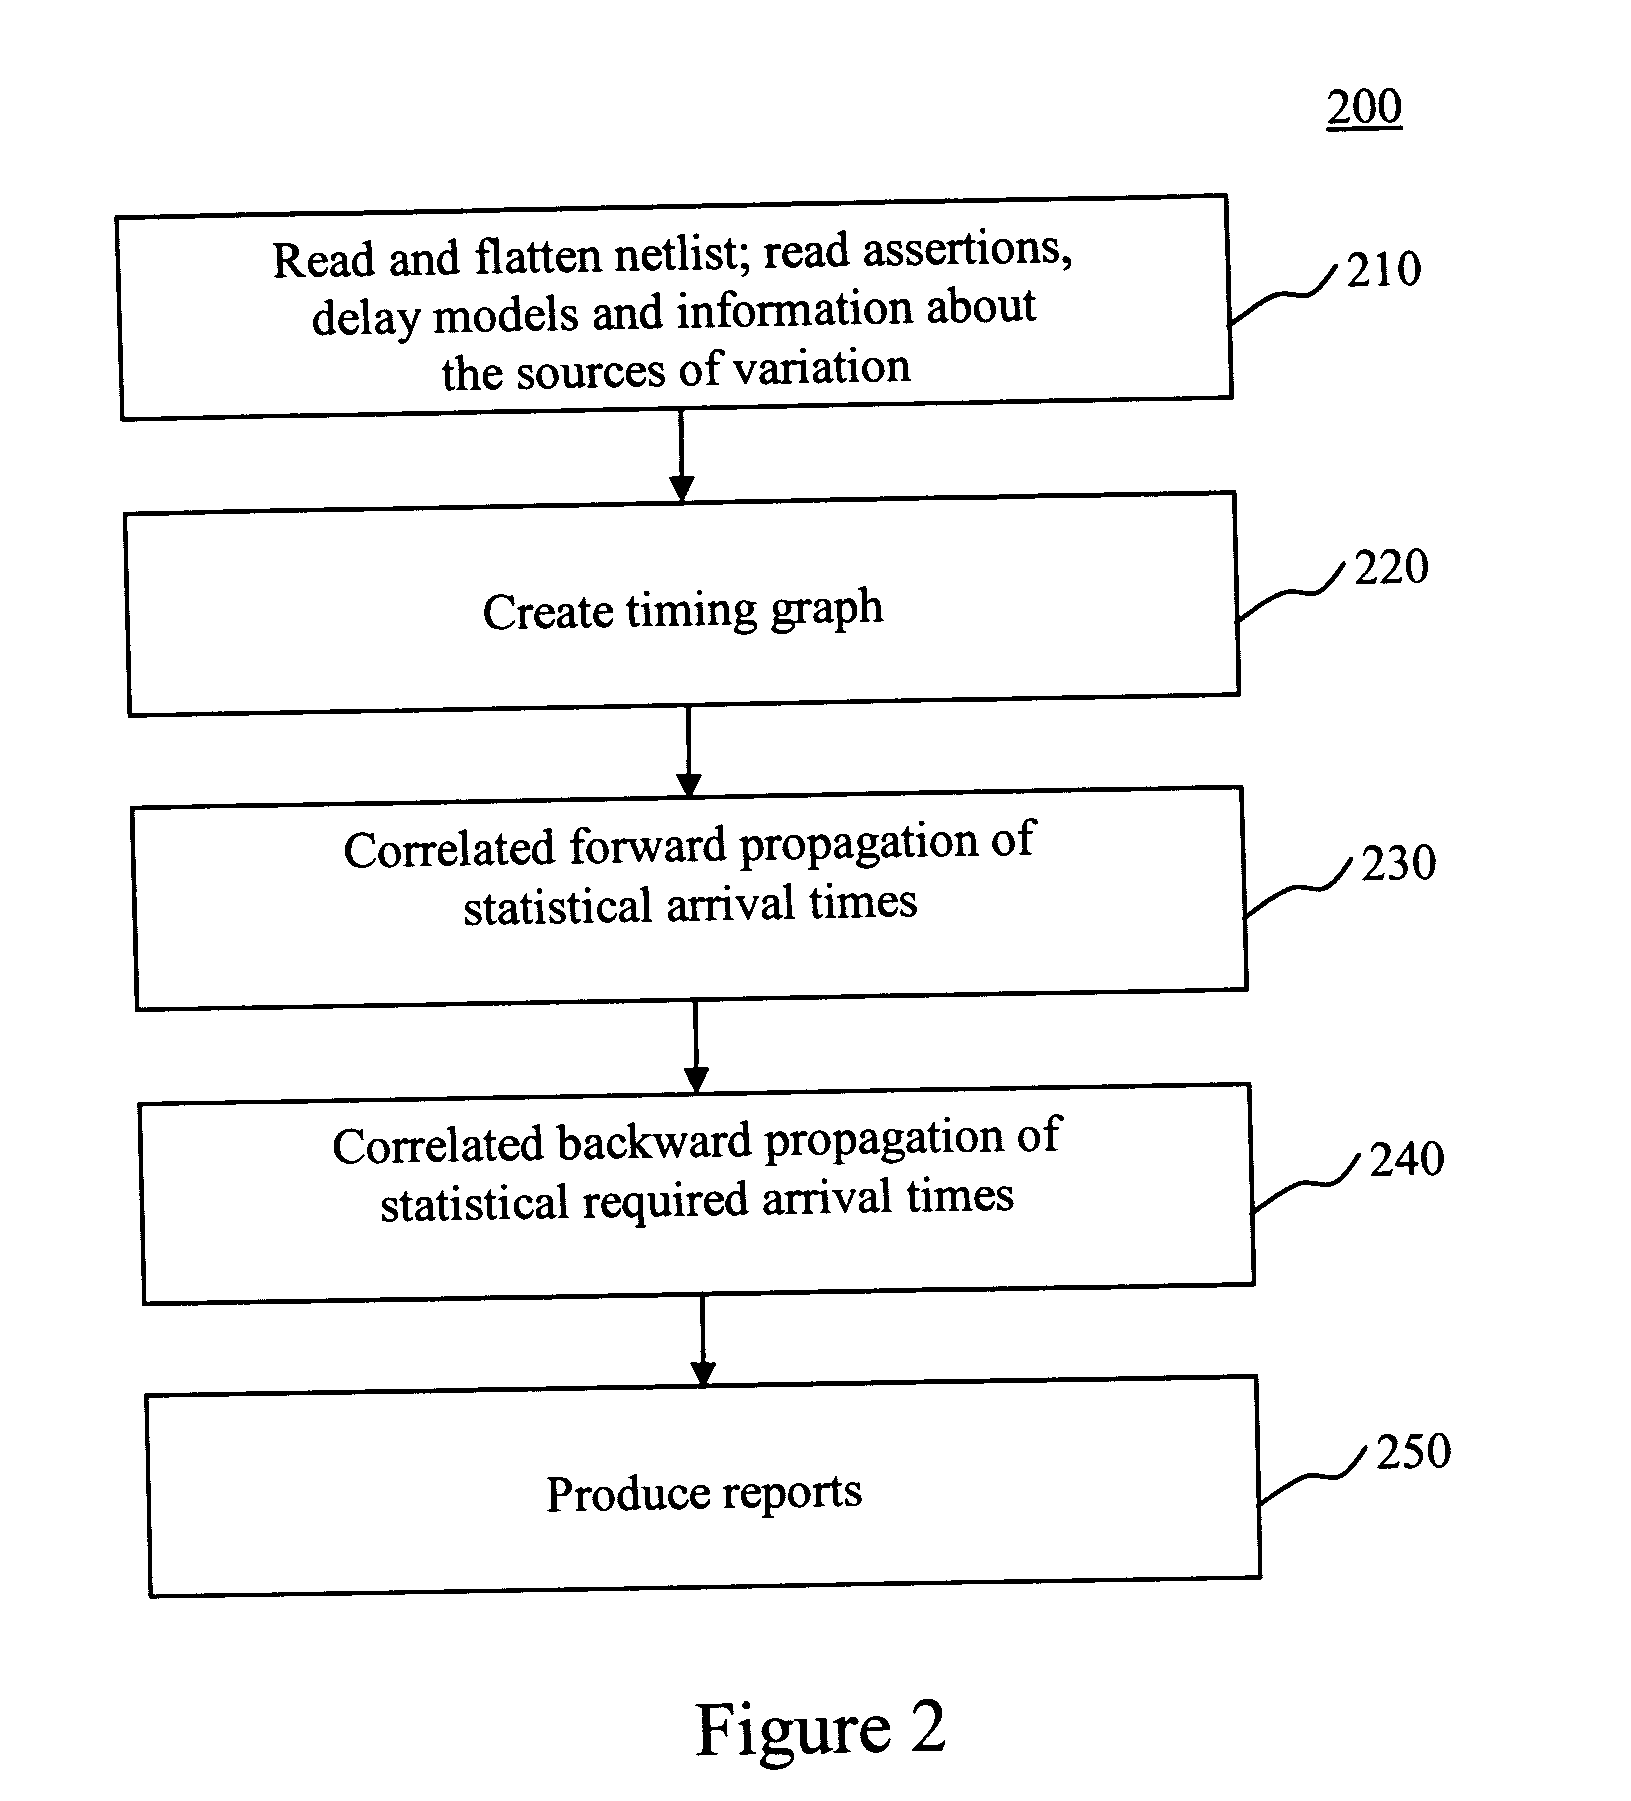 System and method for statistical timing analysis of digital circuits